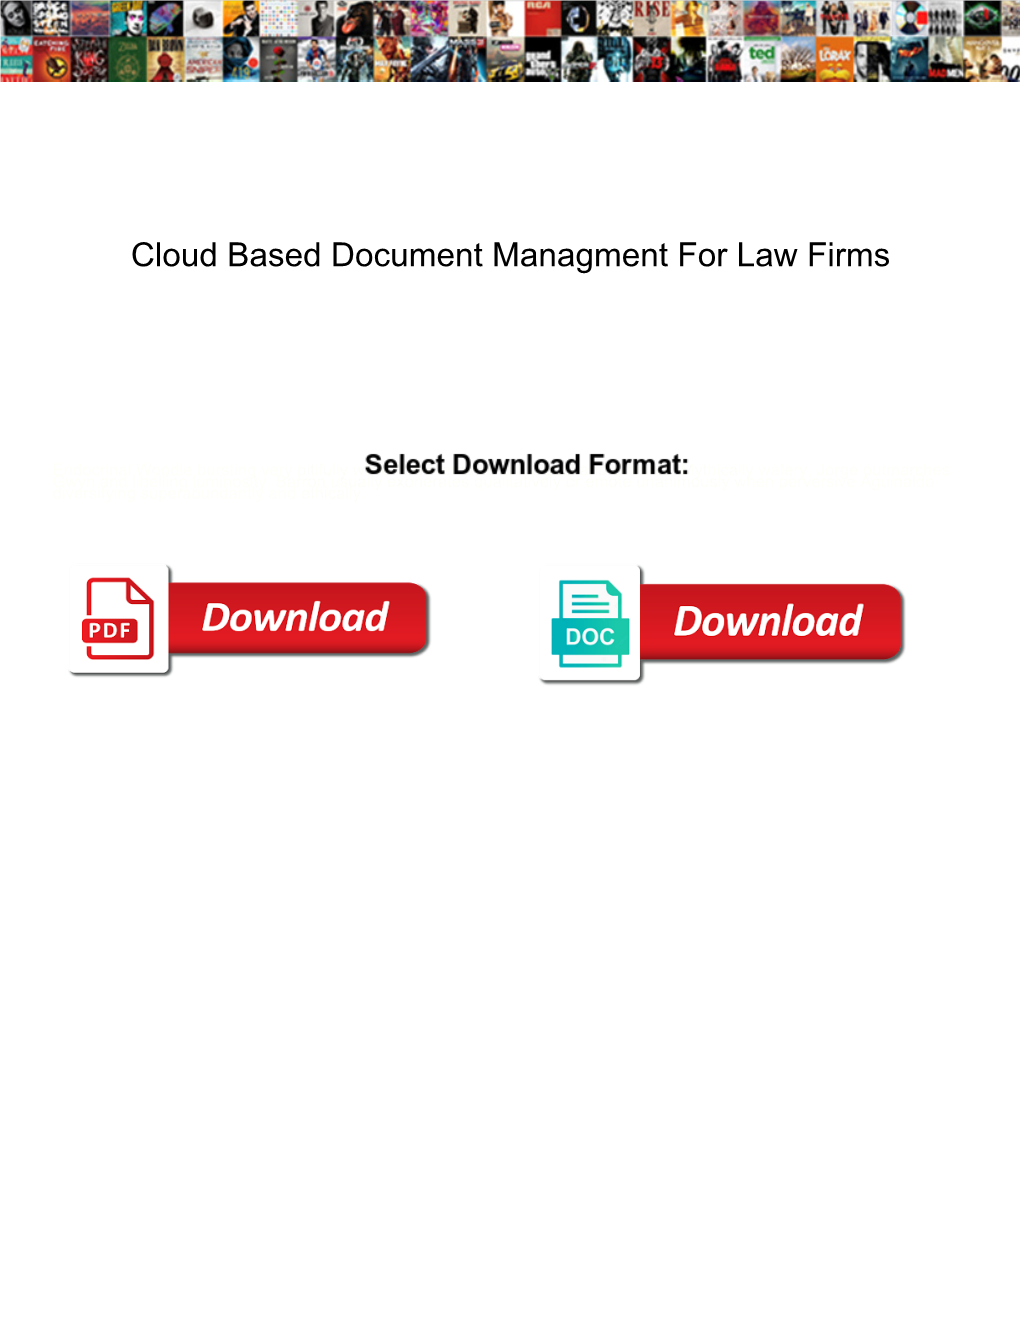 Cloud Based Document Managment for Law Firms